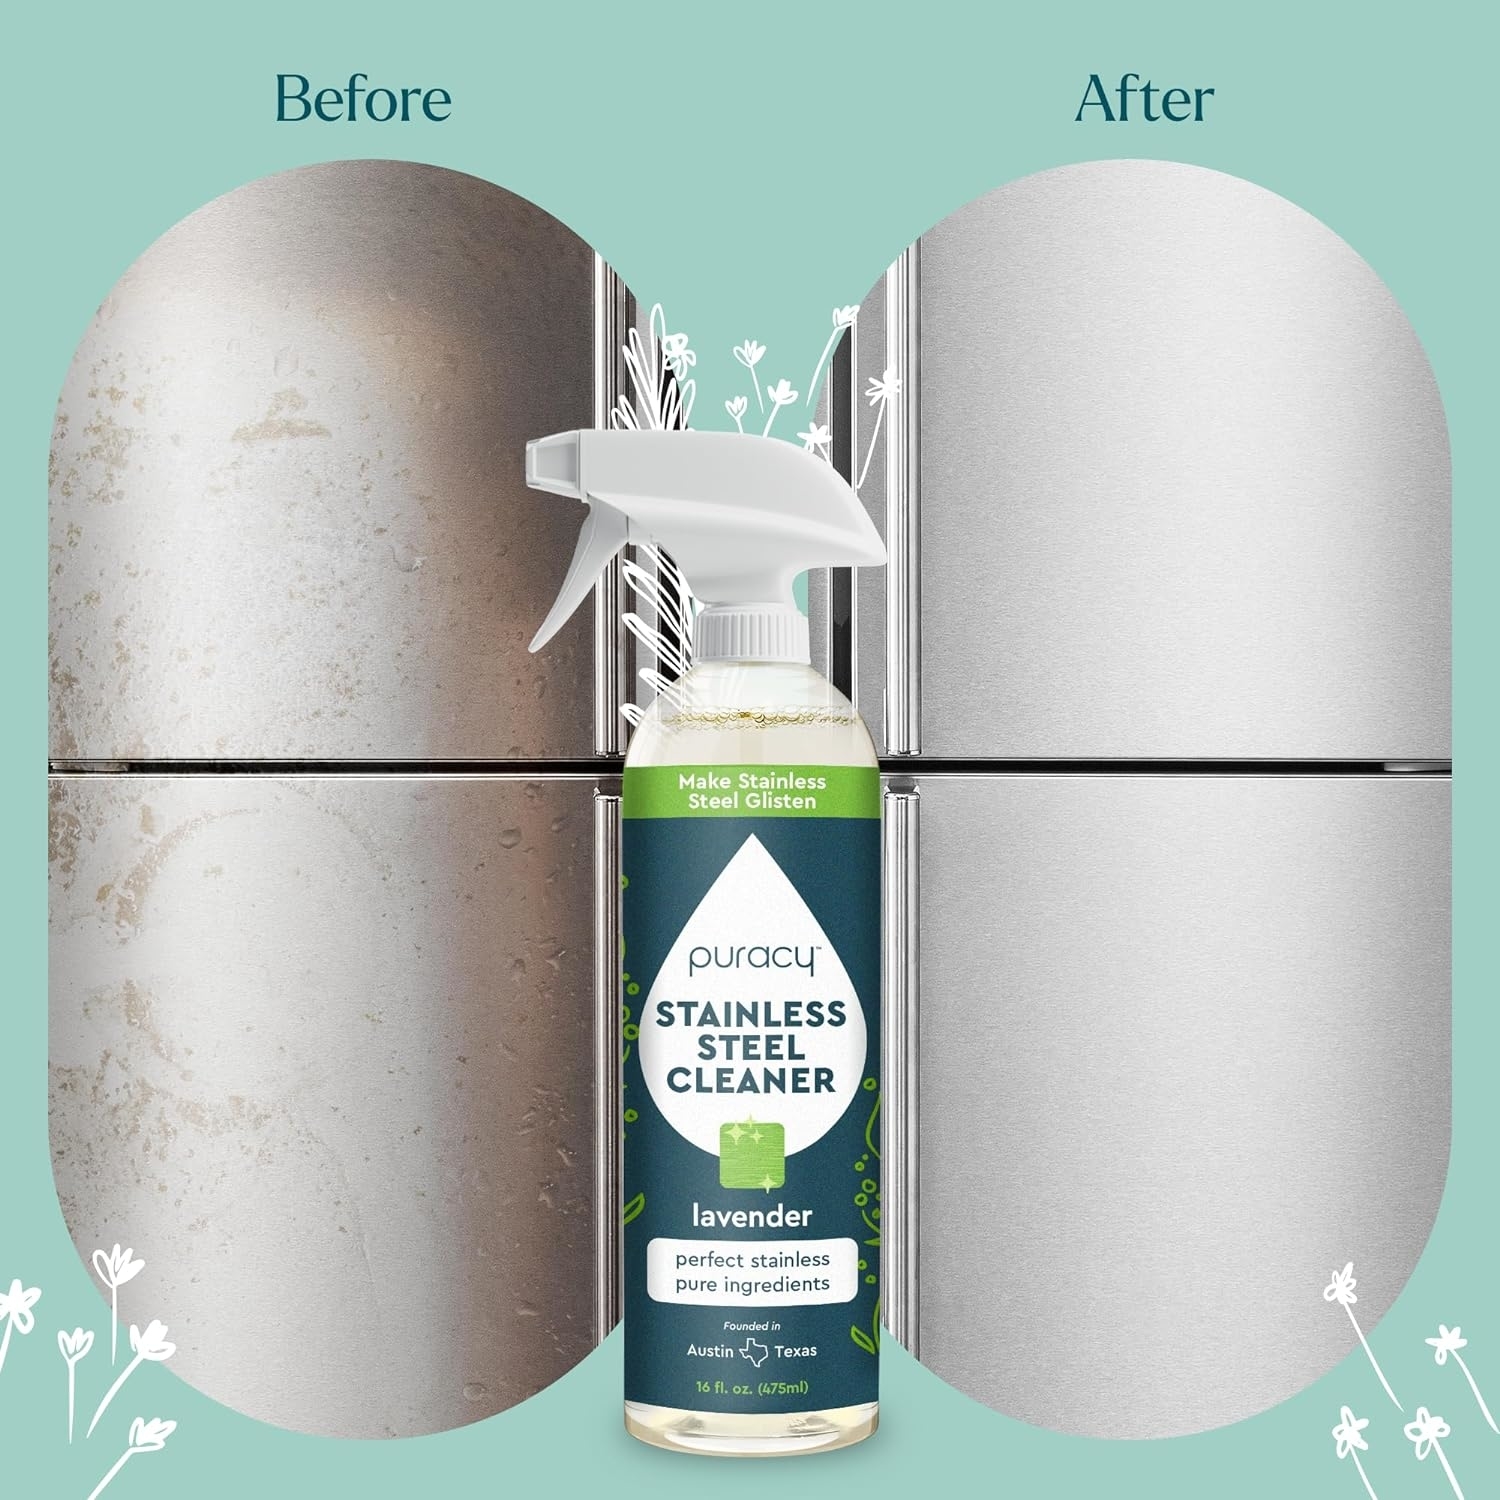 Stainless steel cleaner ad showing a dirty surface &#x27;Before&#x27; and a clean surface &#x27;After&#x27; with a spray bottle in center